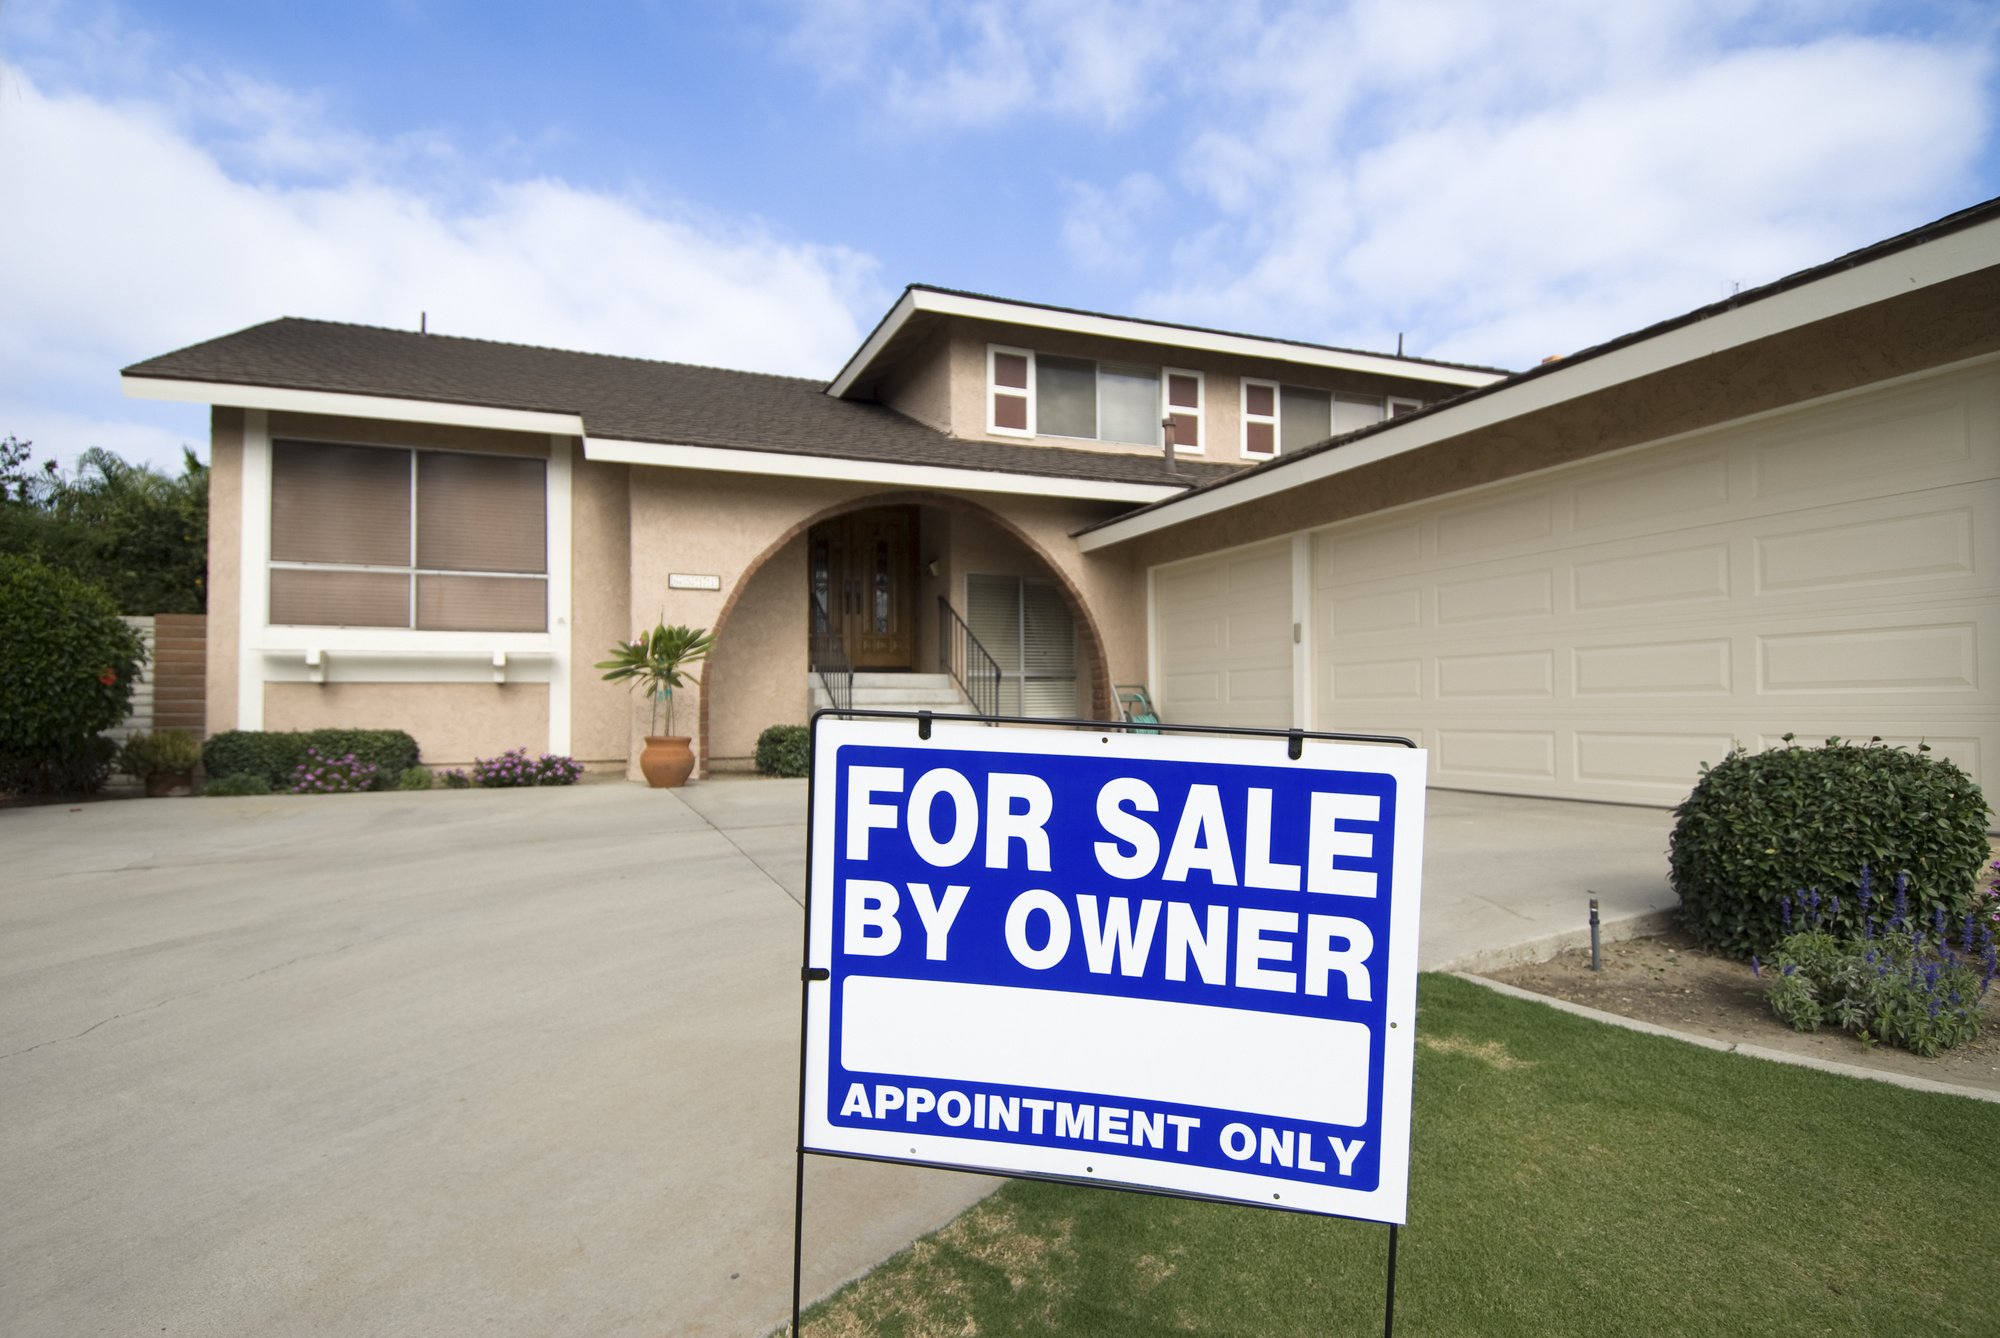 Who Draws Up a Contract in the For Sale by Owner Process?